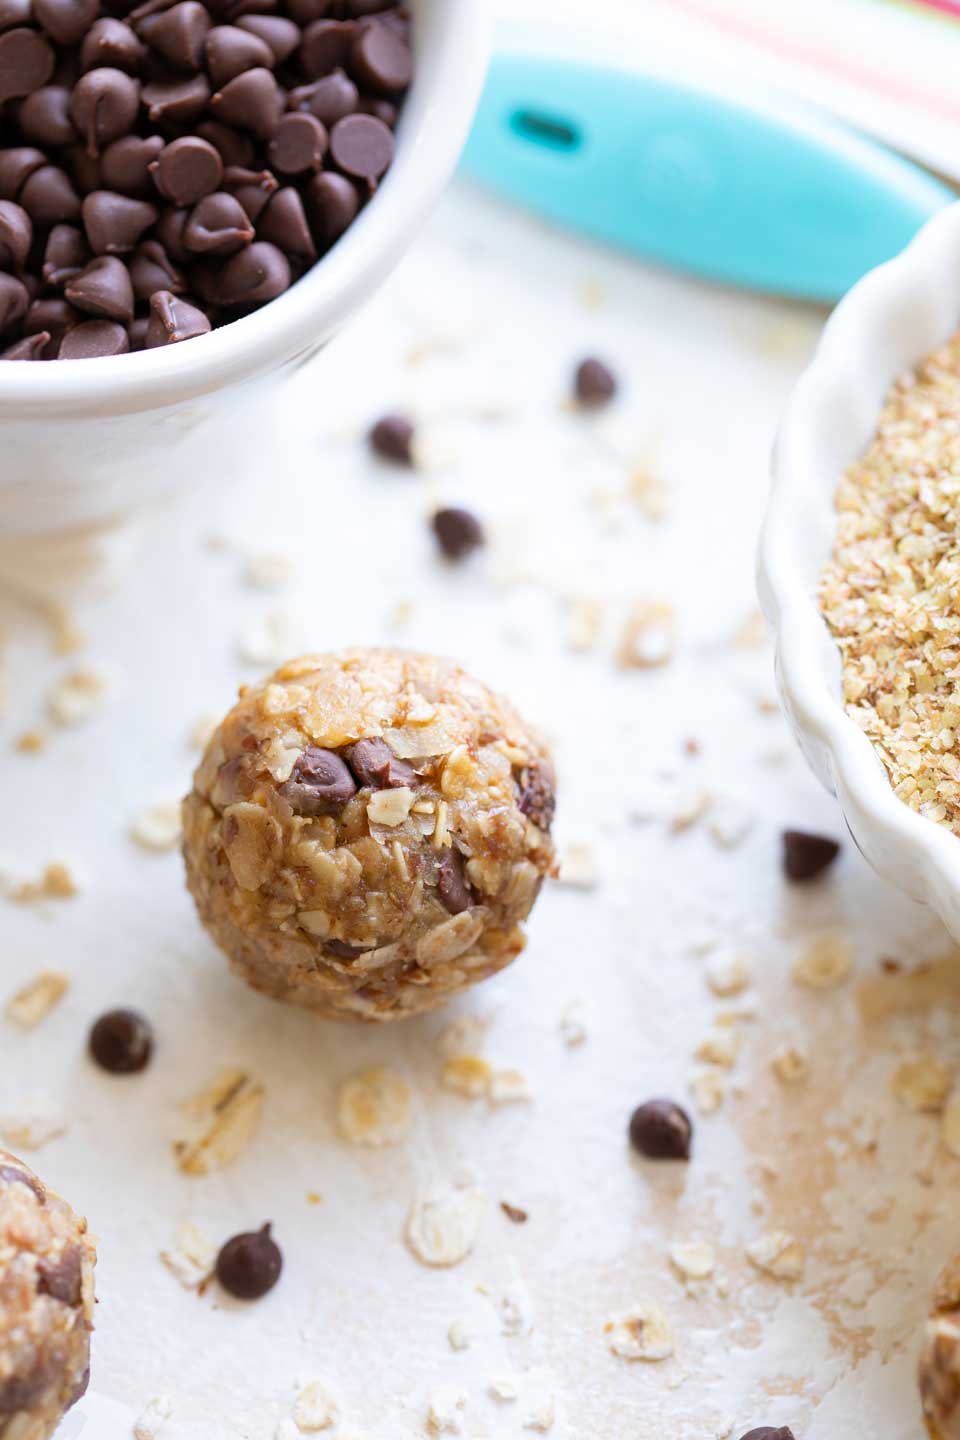 Closeup of one healthy Energy Ball laying between bowls of chocolate chips and wheat germ.